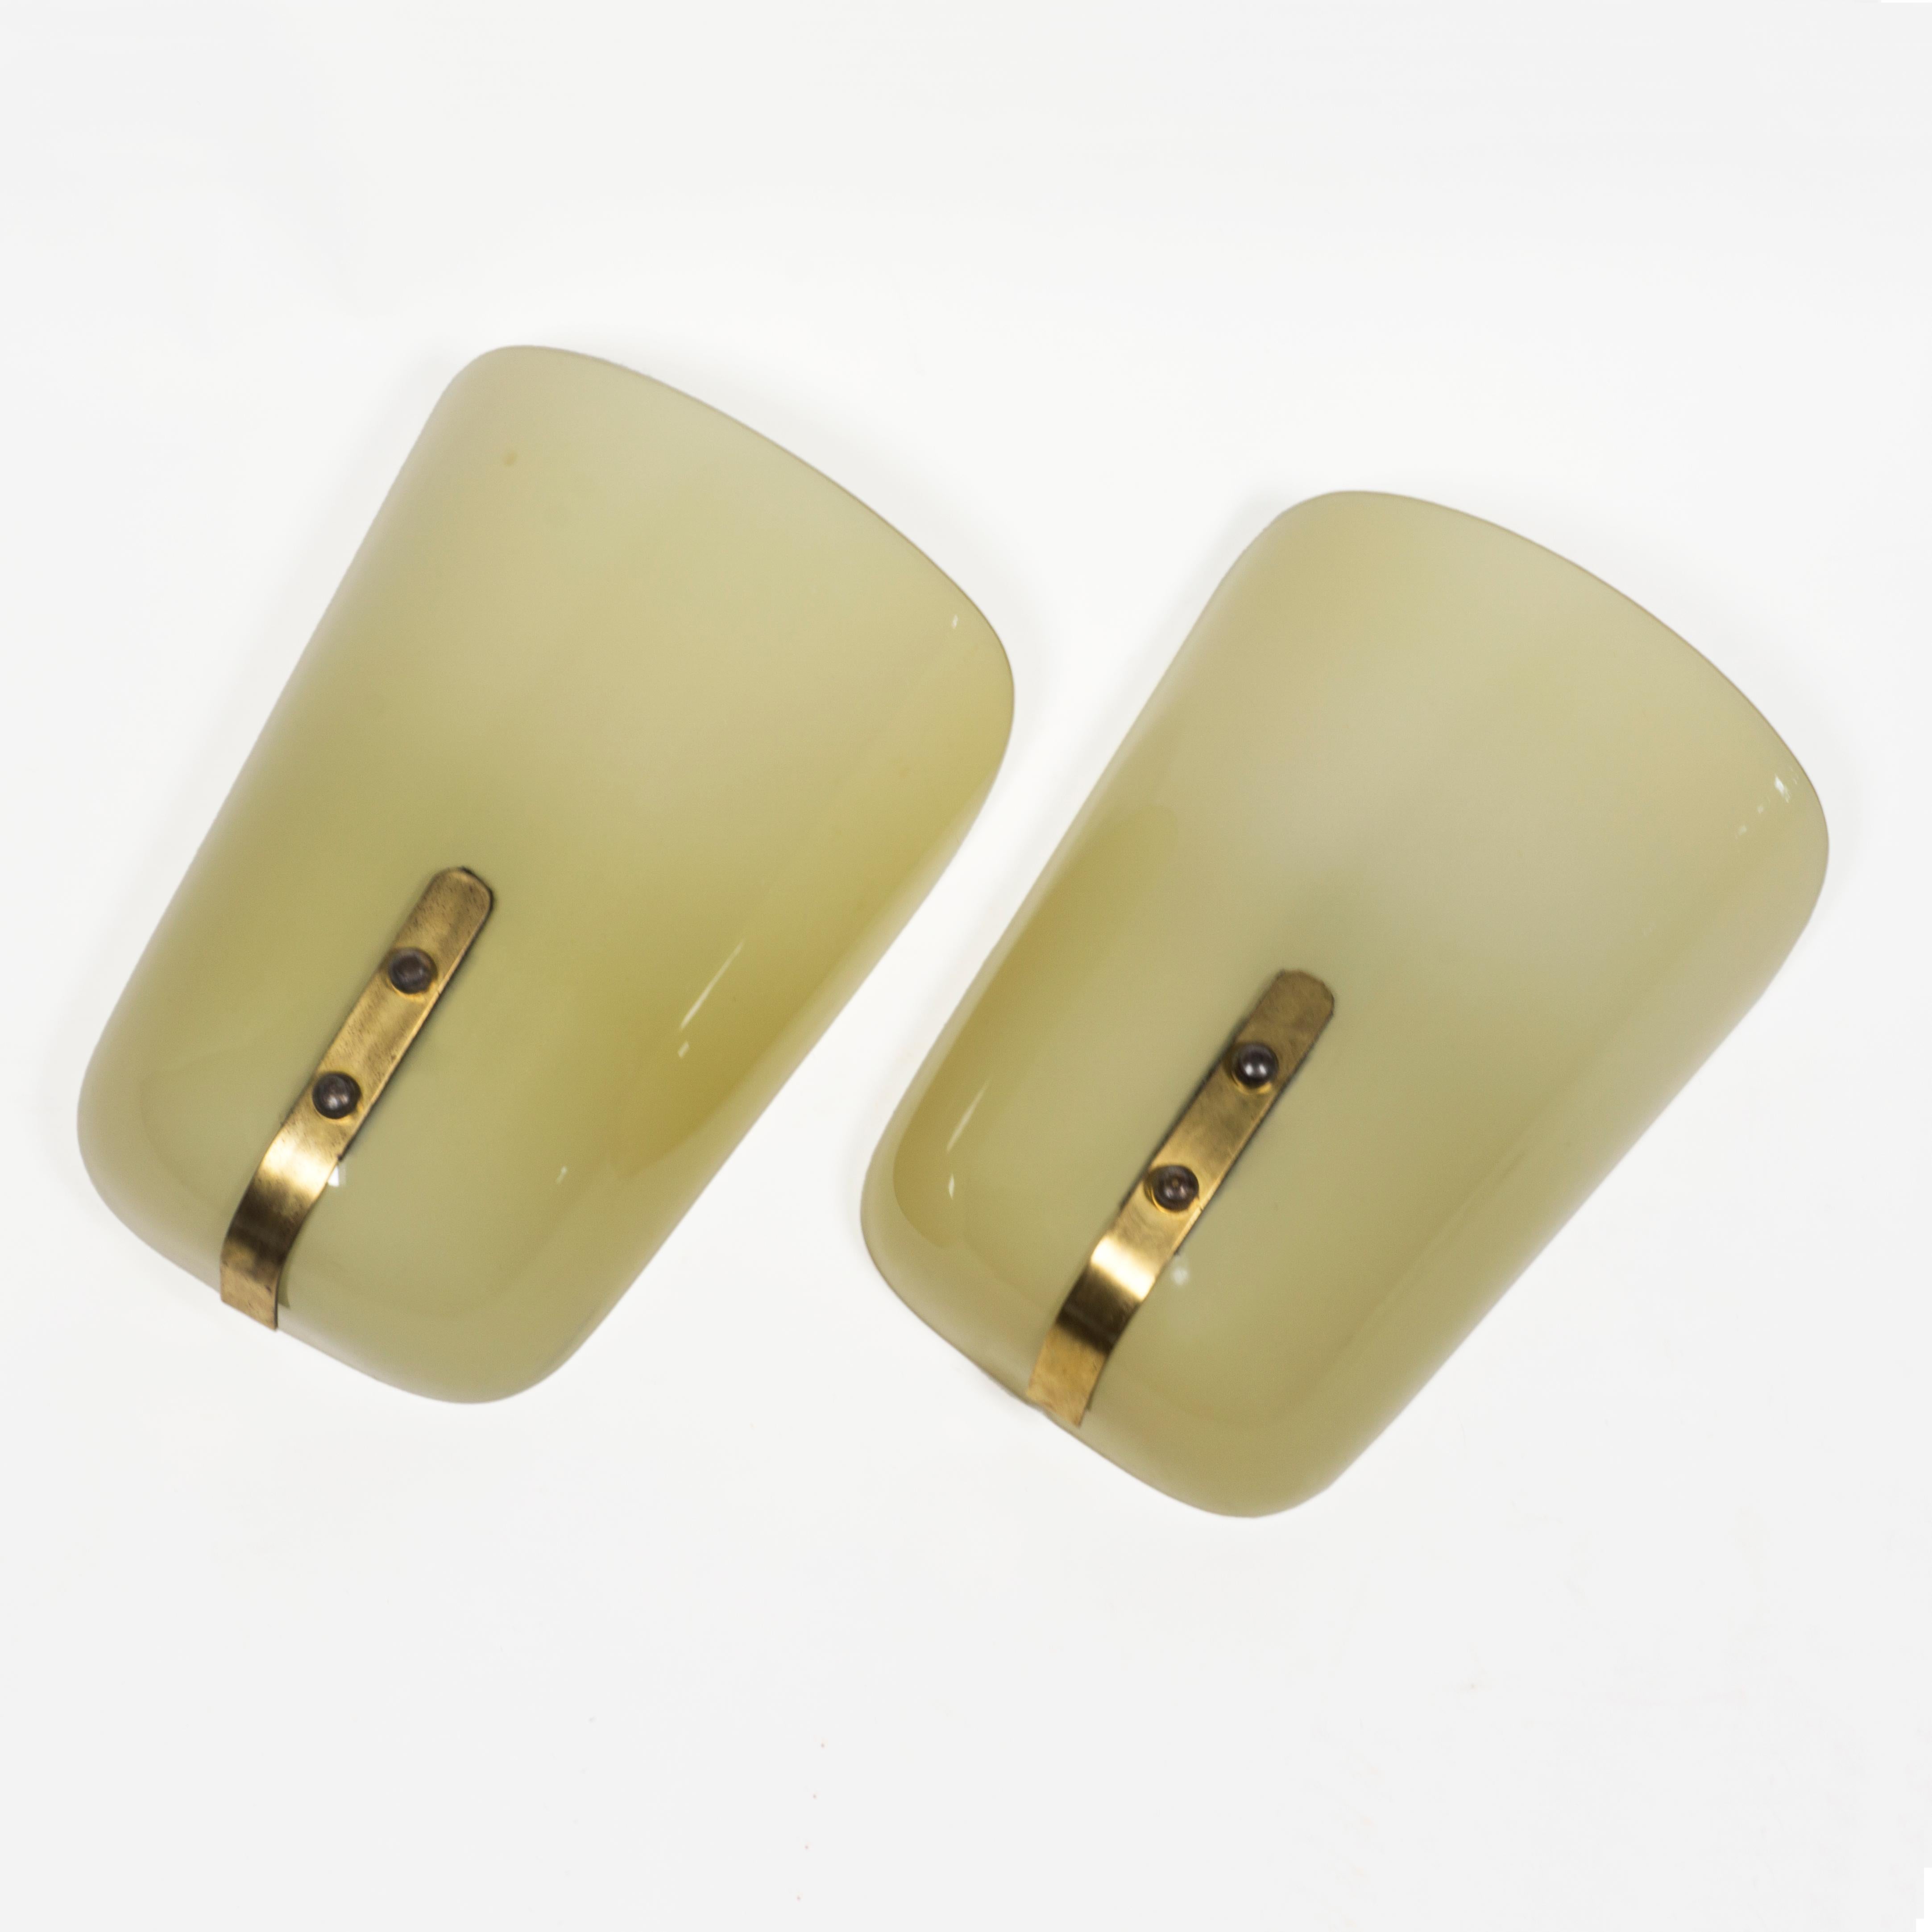 Very elegant pair of sconces from the Art Deco period. 
Each wall light has a large shade made of thick yellowish glass which is attached to the brass holder with two screws. Timeless design and high-quality workmanship.
These lamps produce a very